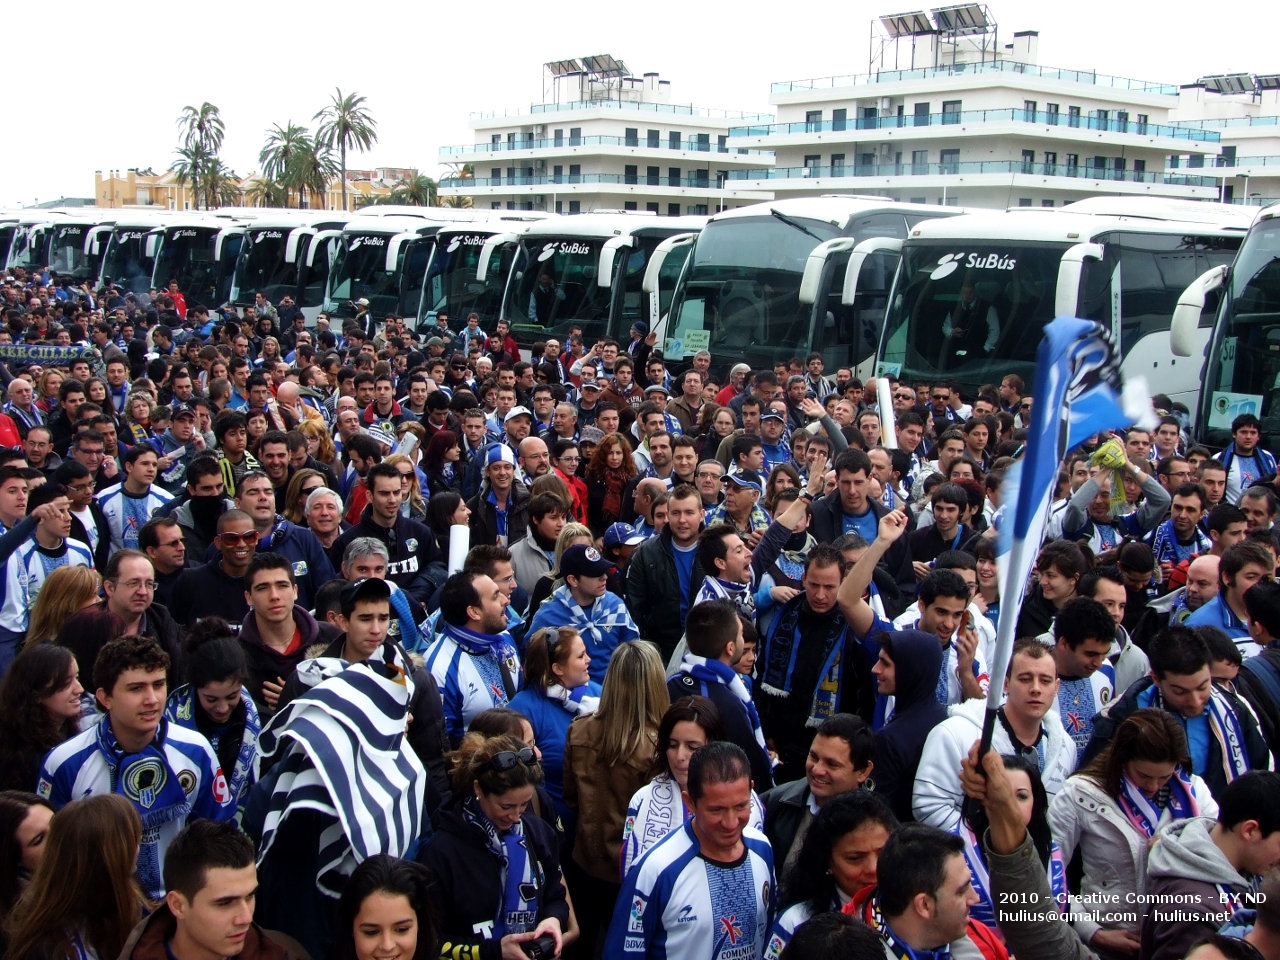 a big group of people near some buses